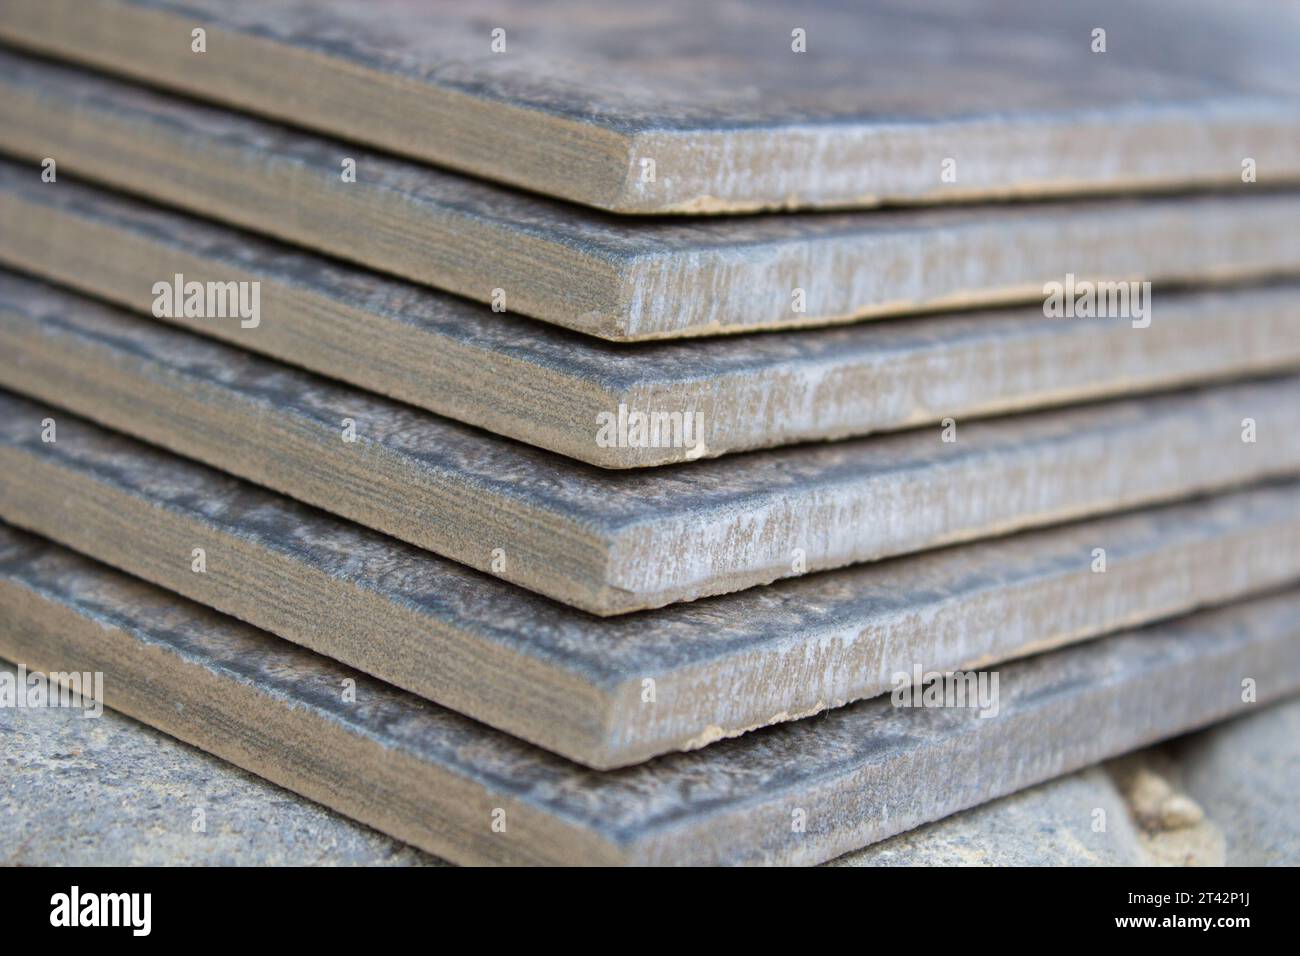 A pile of composite ceramic tiles for stairs Stock Photo